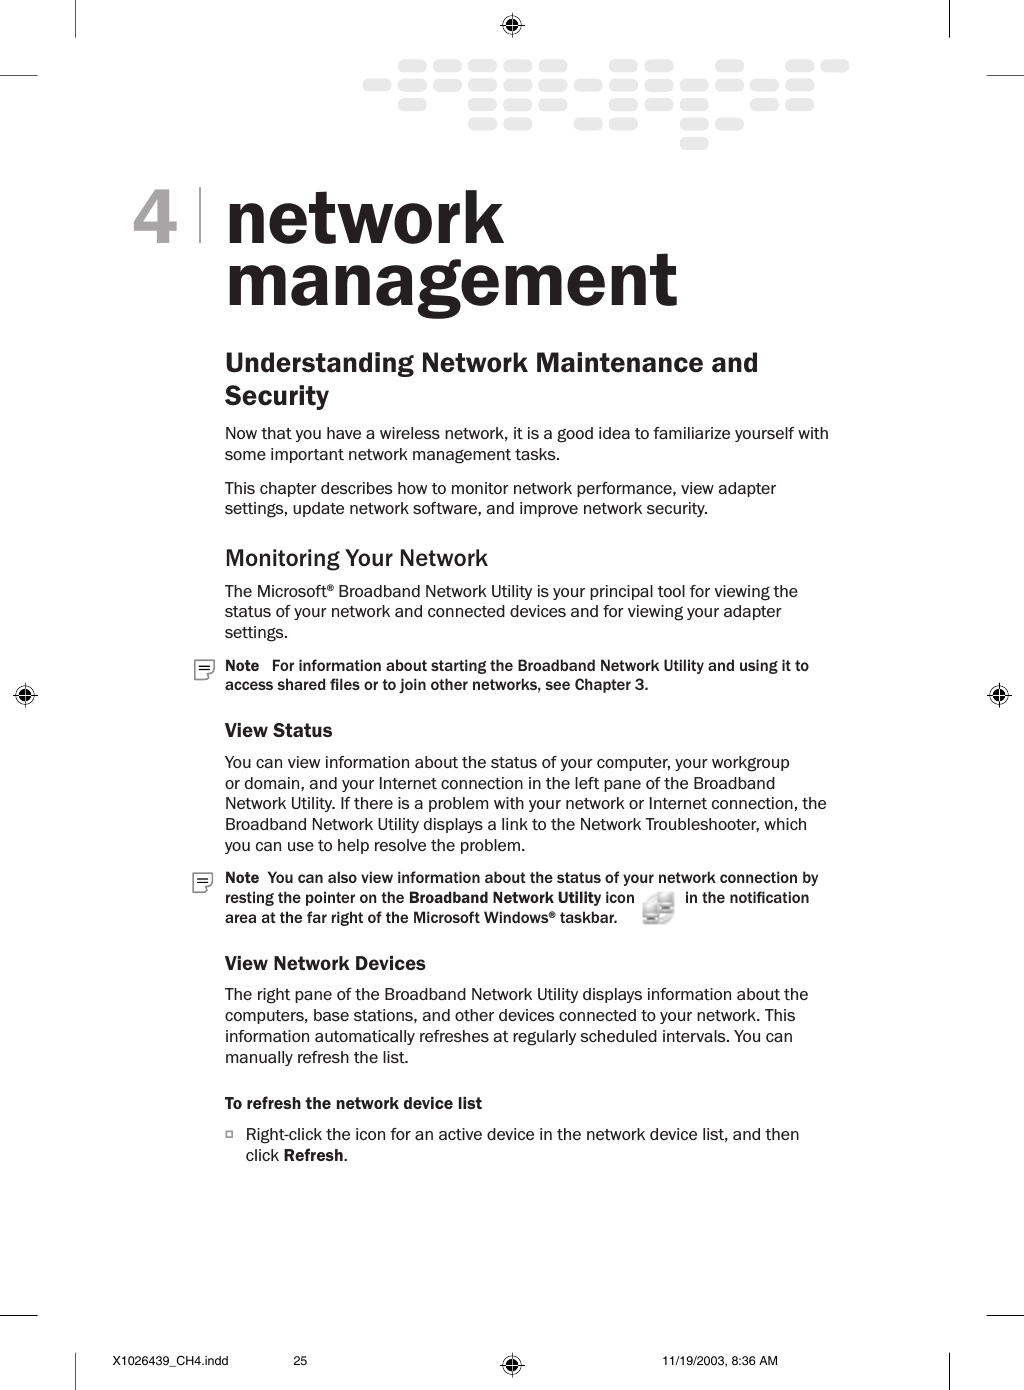 networkmanagementUnderstanding Network Maintenance and Security Now that you have a wireless network, it is a good idea to familiarize yourself with some important network management tasks. This chapter describes how to monitor network performance, view adapter settings, update network software, and improve network security.Monitoring Your NetworkThe Microsoft® Broadband Network Utility is your principal tool for viewing the status of your network and connected devices and for viewing your adapter settings. Note   For information about starting the Broadband Network Utility and using it to access shared les or to join other networks, see Chapter 3.View StatusYou can view information about the status of your computer, your workgroup or domain, and your Internet connection in the left pane of the Broadband Network Utility. If there is a problem with your network or Internet connection, the Broadband Network Utility displays a link to the Network Troubleshooter, which you can use to help resolve the problem.  Note  You can also view information about the status of your network connection by resting the pointer on the Broadband Network Utility icon   in the notication area at the far right of the Microsoft Windows® taskbar.View Network DevicesThe right pane of the Broadband Network Utility displays information about the computers, base stations, and other devices connected to your network. This information automatically refreshes at regularly scheduled intervals. You can manually refresh the list.To refresh the network device listO  Right-click the icon for an active device in the network device list, and then click Refresh.4X1026439_CH4.indd 11/19/2003, 8:36 AM25